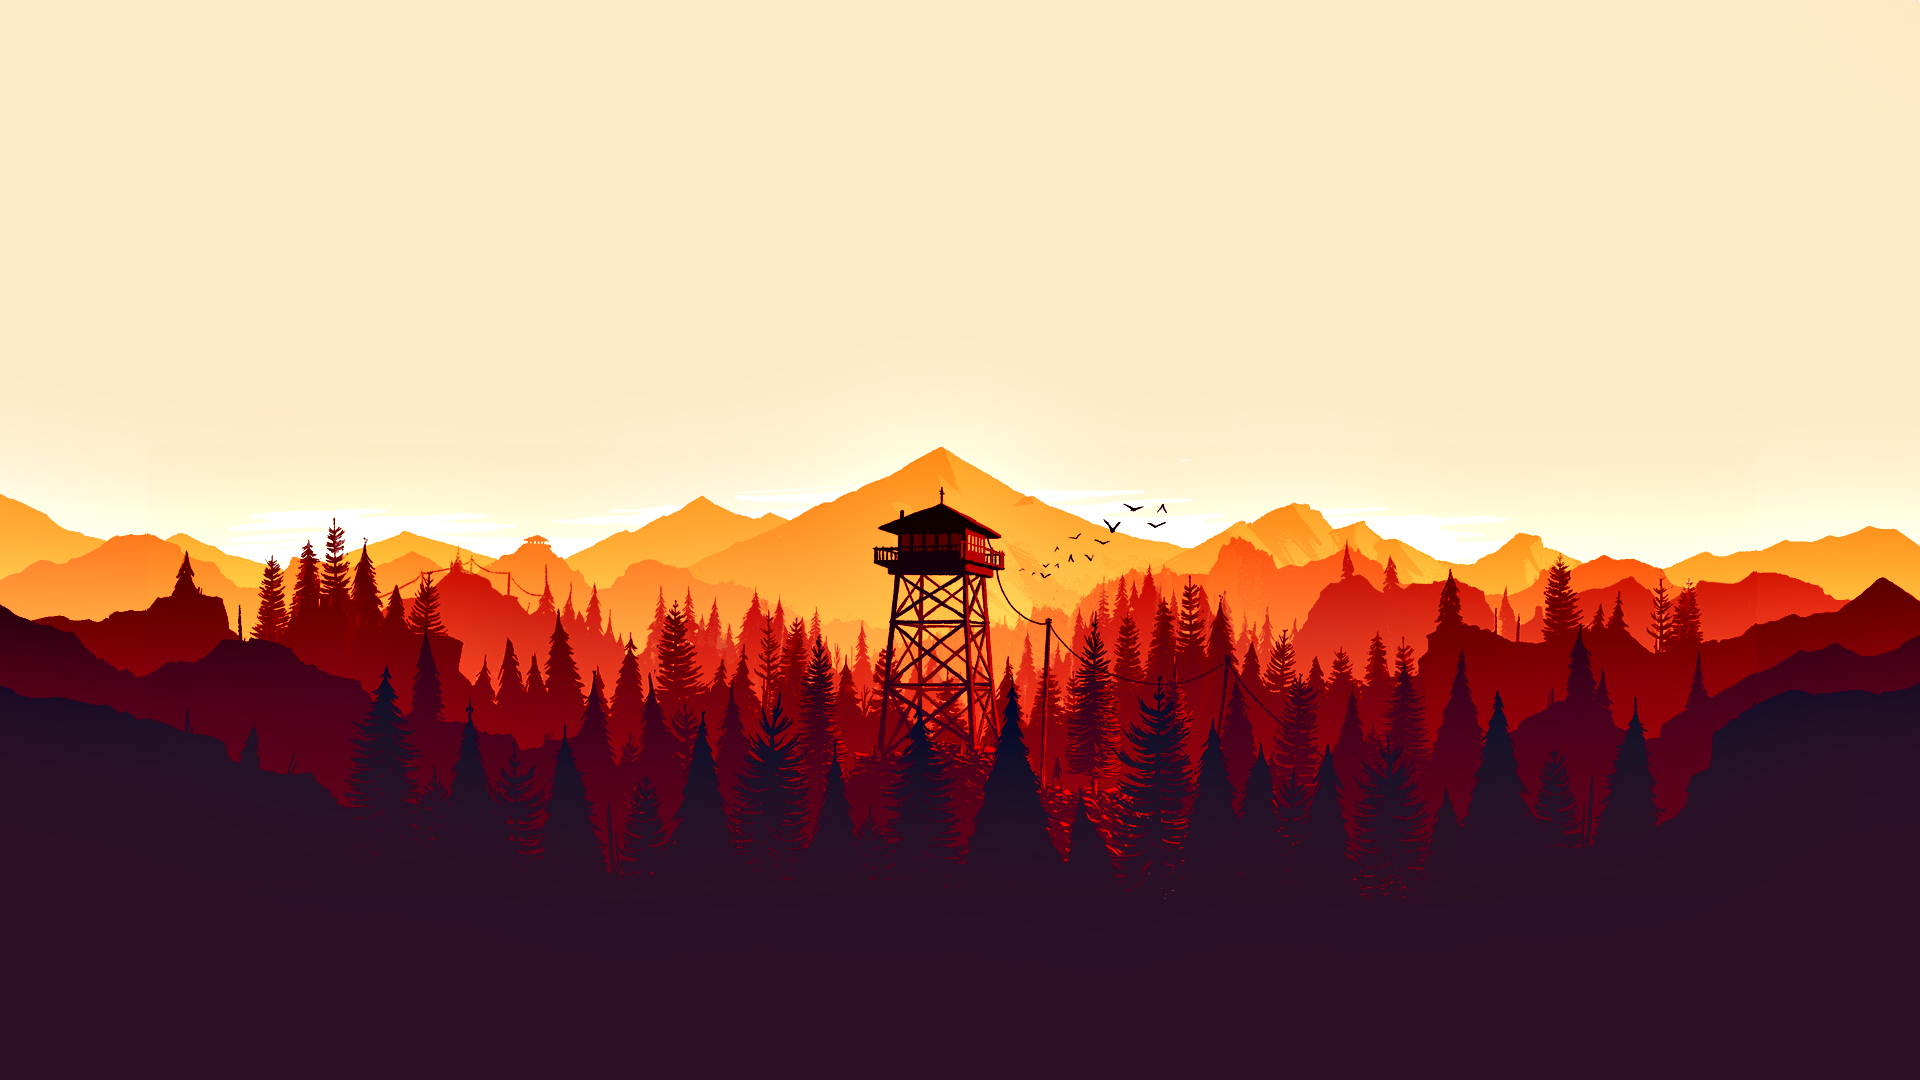 Fire Tower Wallpapers Wallpaper Cave